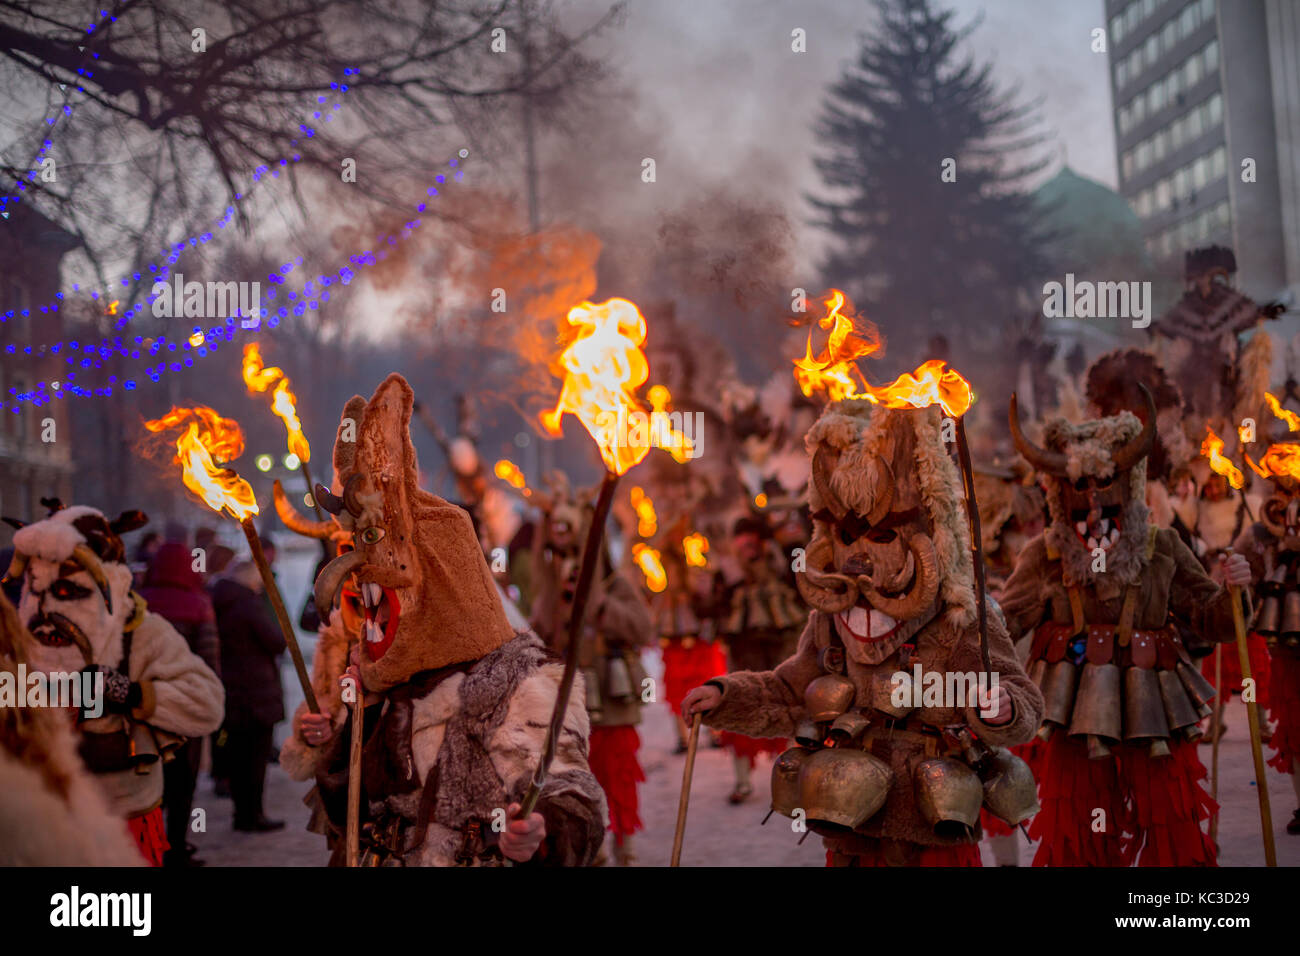 PERNIK, BULGARIA - JANUARY 27, 2017: Masked participants in scary fur costumes and wooden masks with horns are holding burning torches while marching  Stock Photo